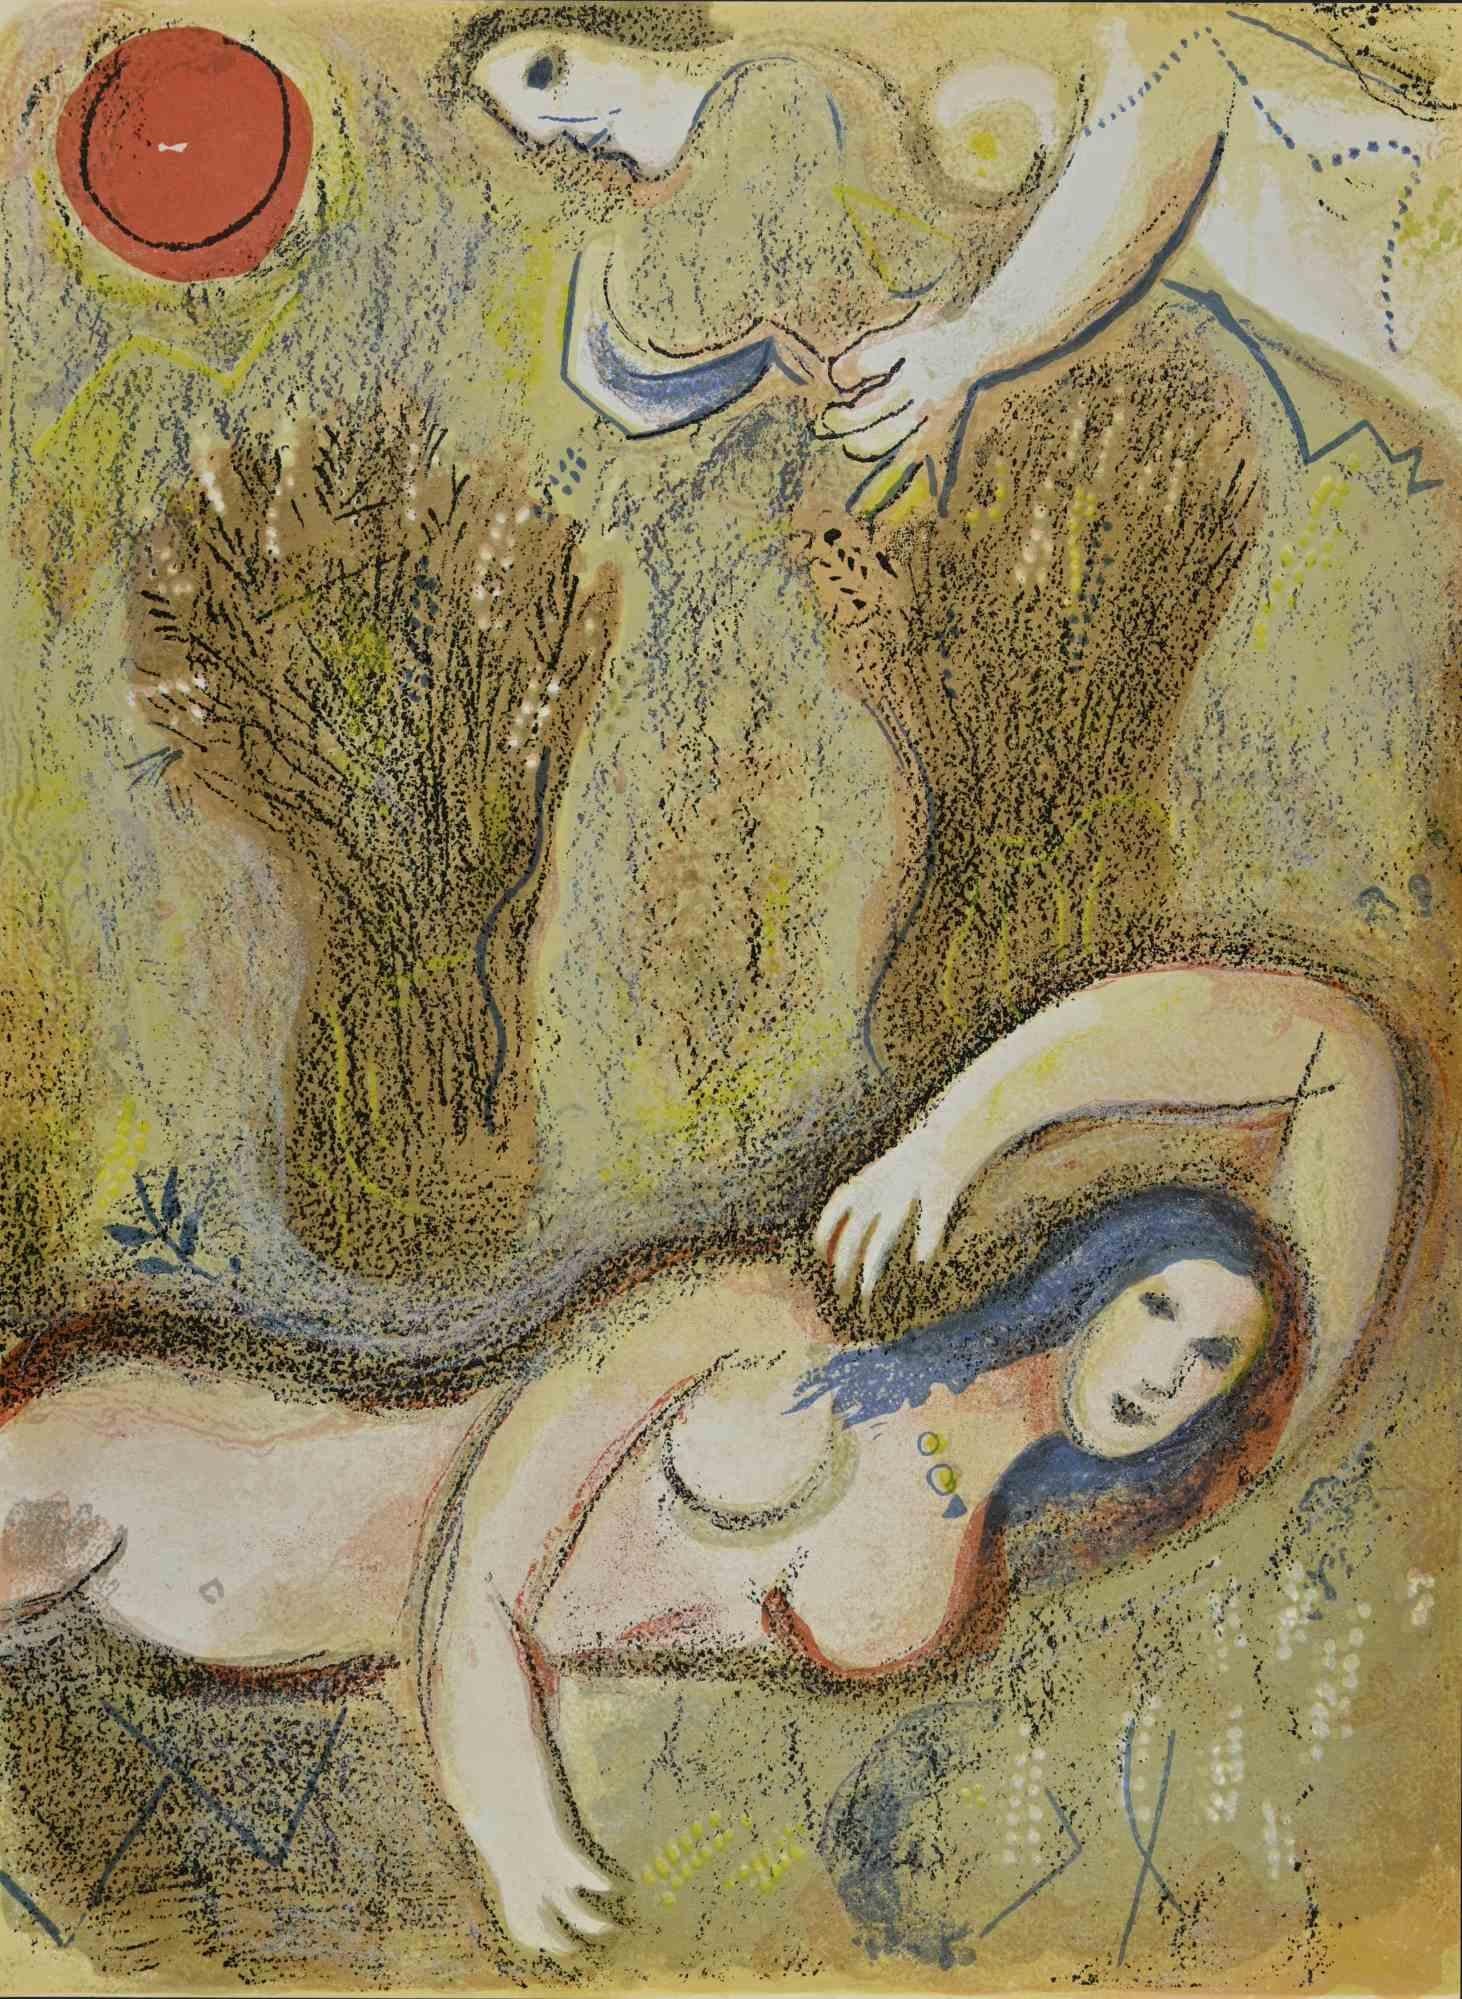 The awakening of Boaz  is an artwork from the Series "The Bible", by Marc Chagall in 1960.

Mixed colored lithograph on brown-toned paper, no signature.

Edition of 6500 unsigned lithographs. Printed by Mourlot and published by Tériade,